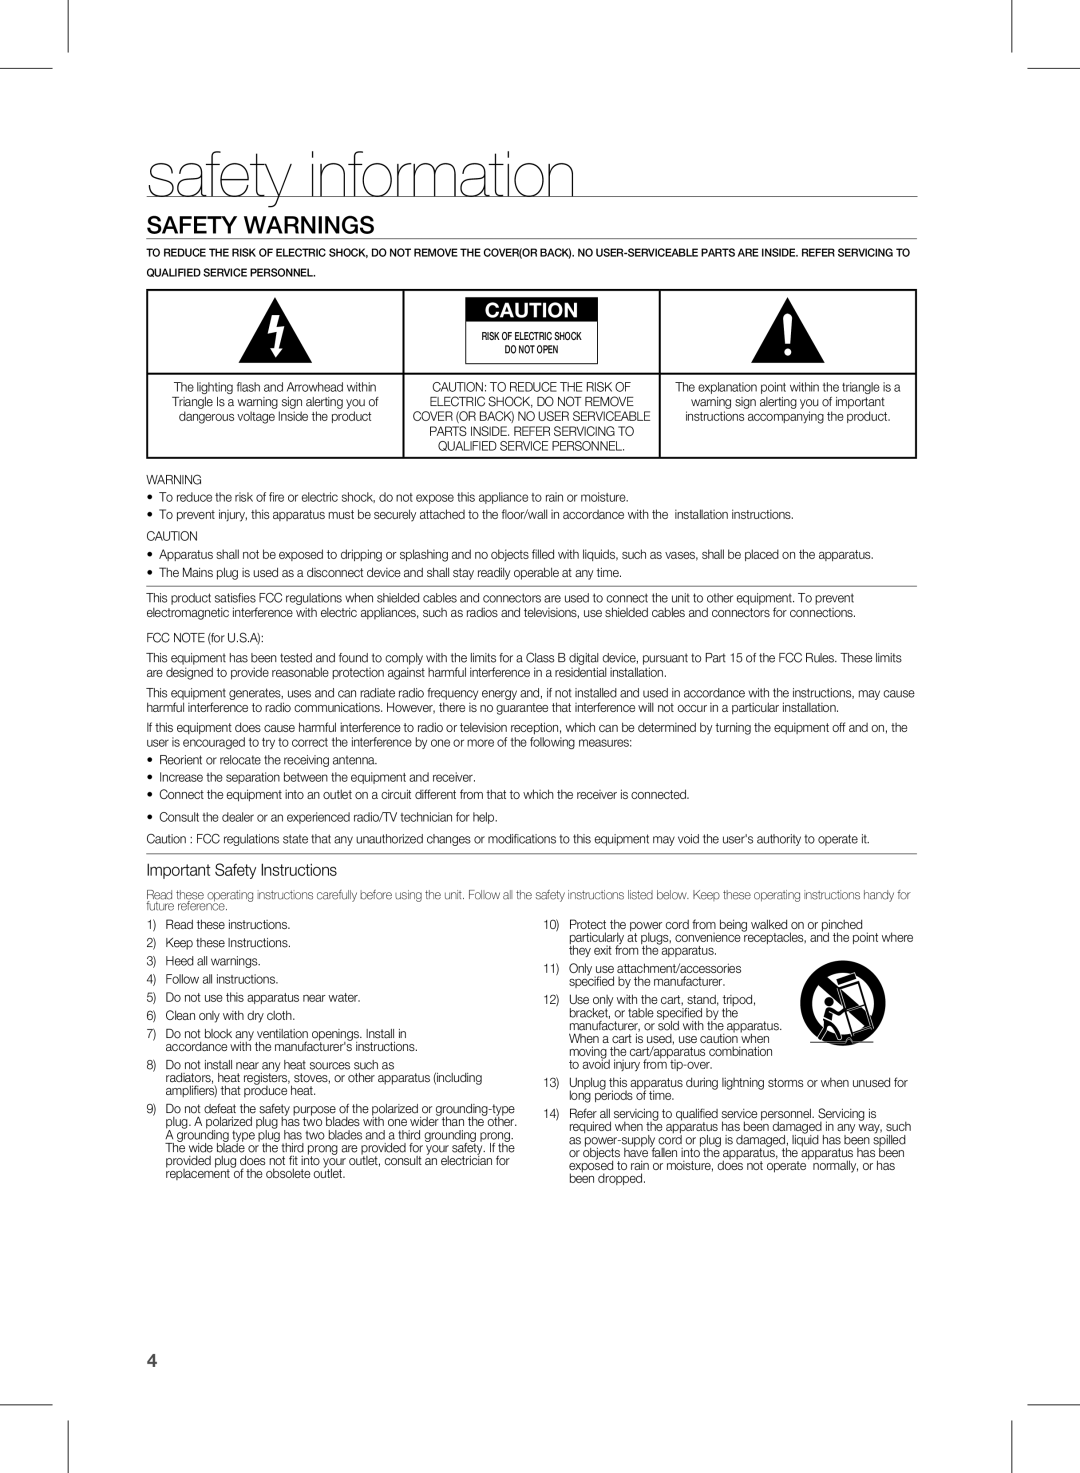 Siemens HW-D450 user manual safety information, Safety Warnings 